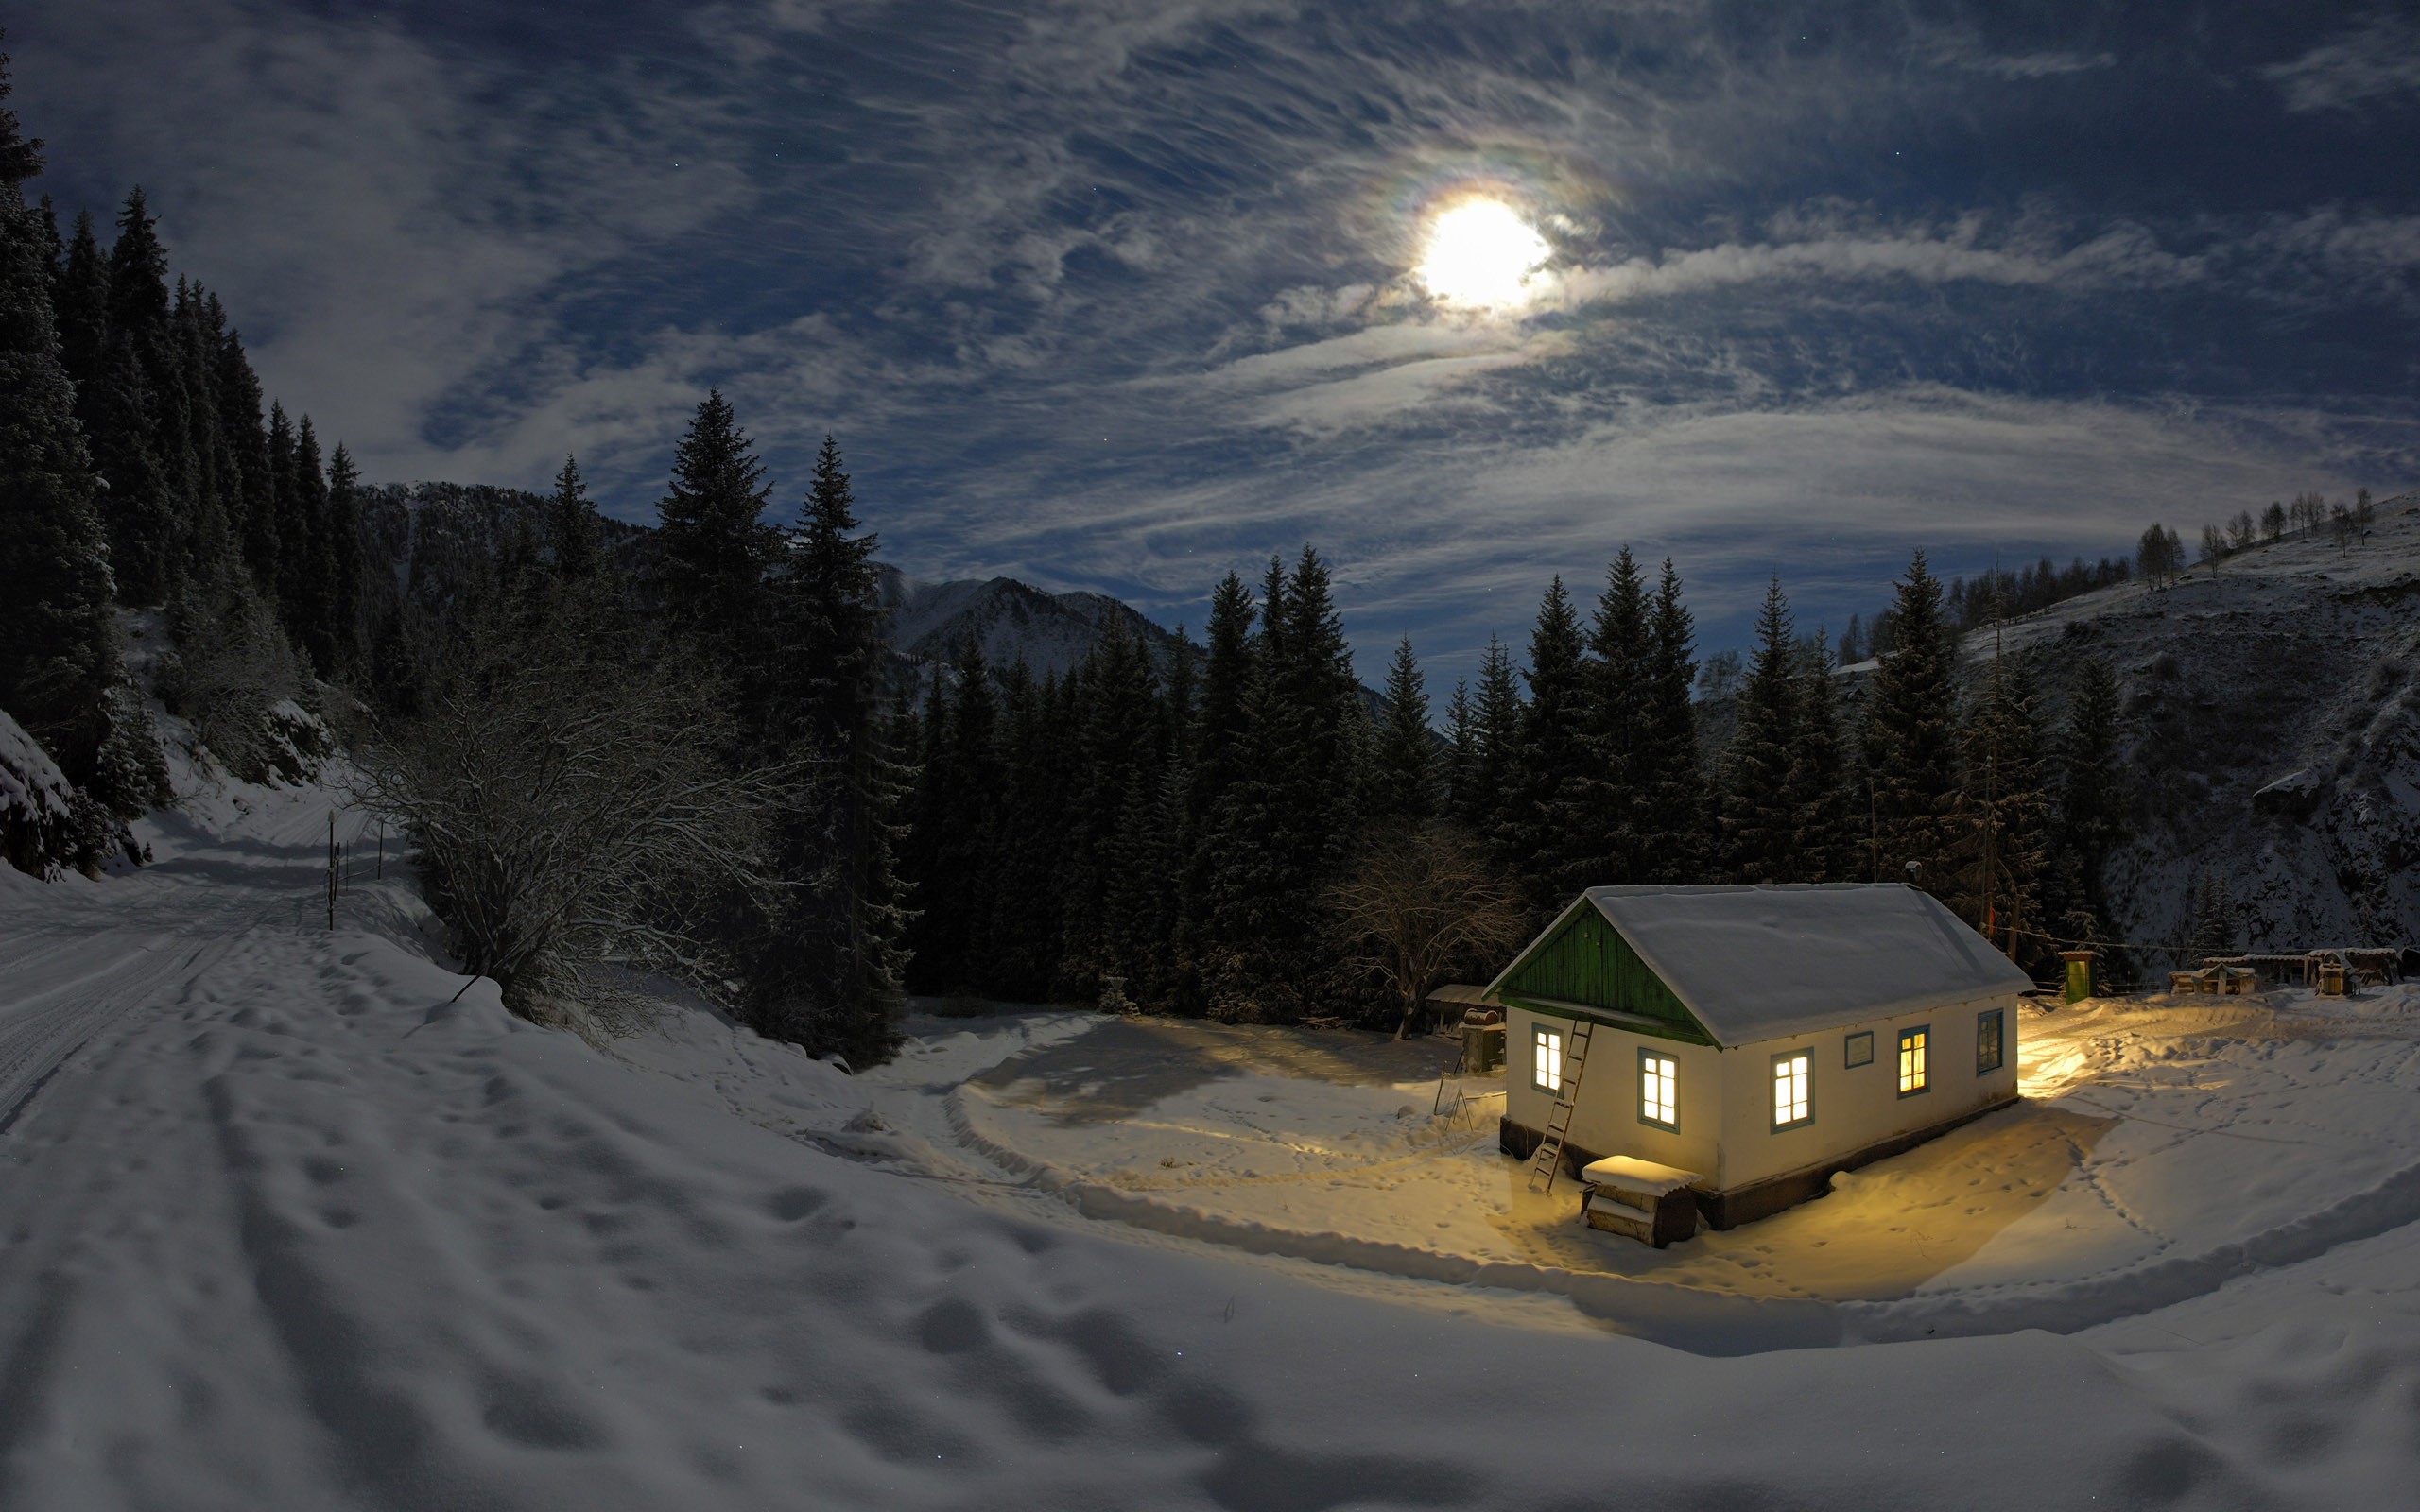 General 2560x1600 night sky Moon nature snow winter house landscape cold outdoors